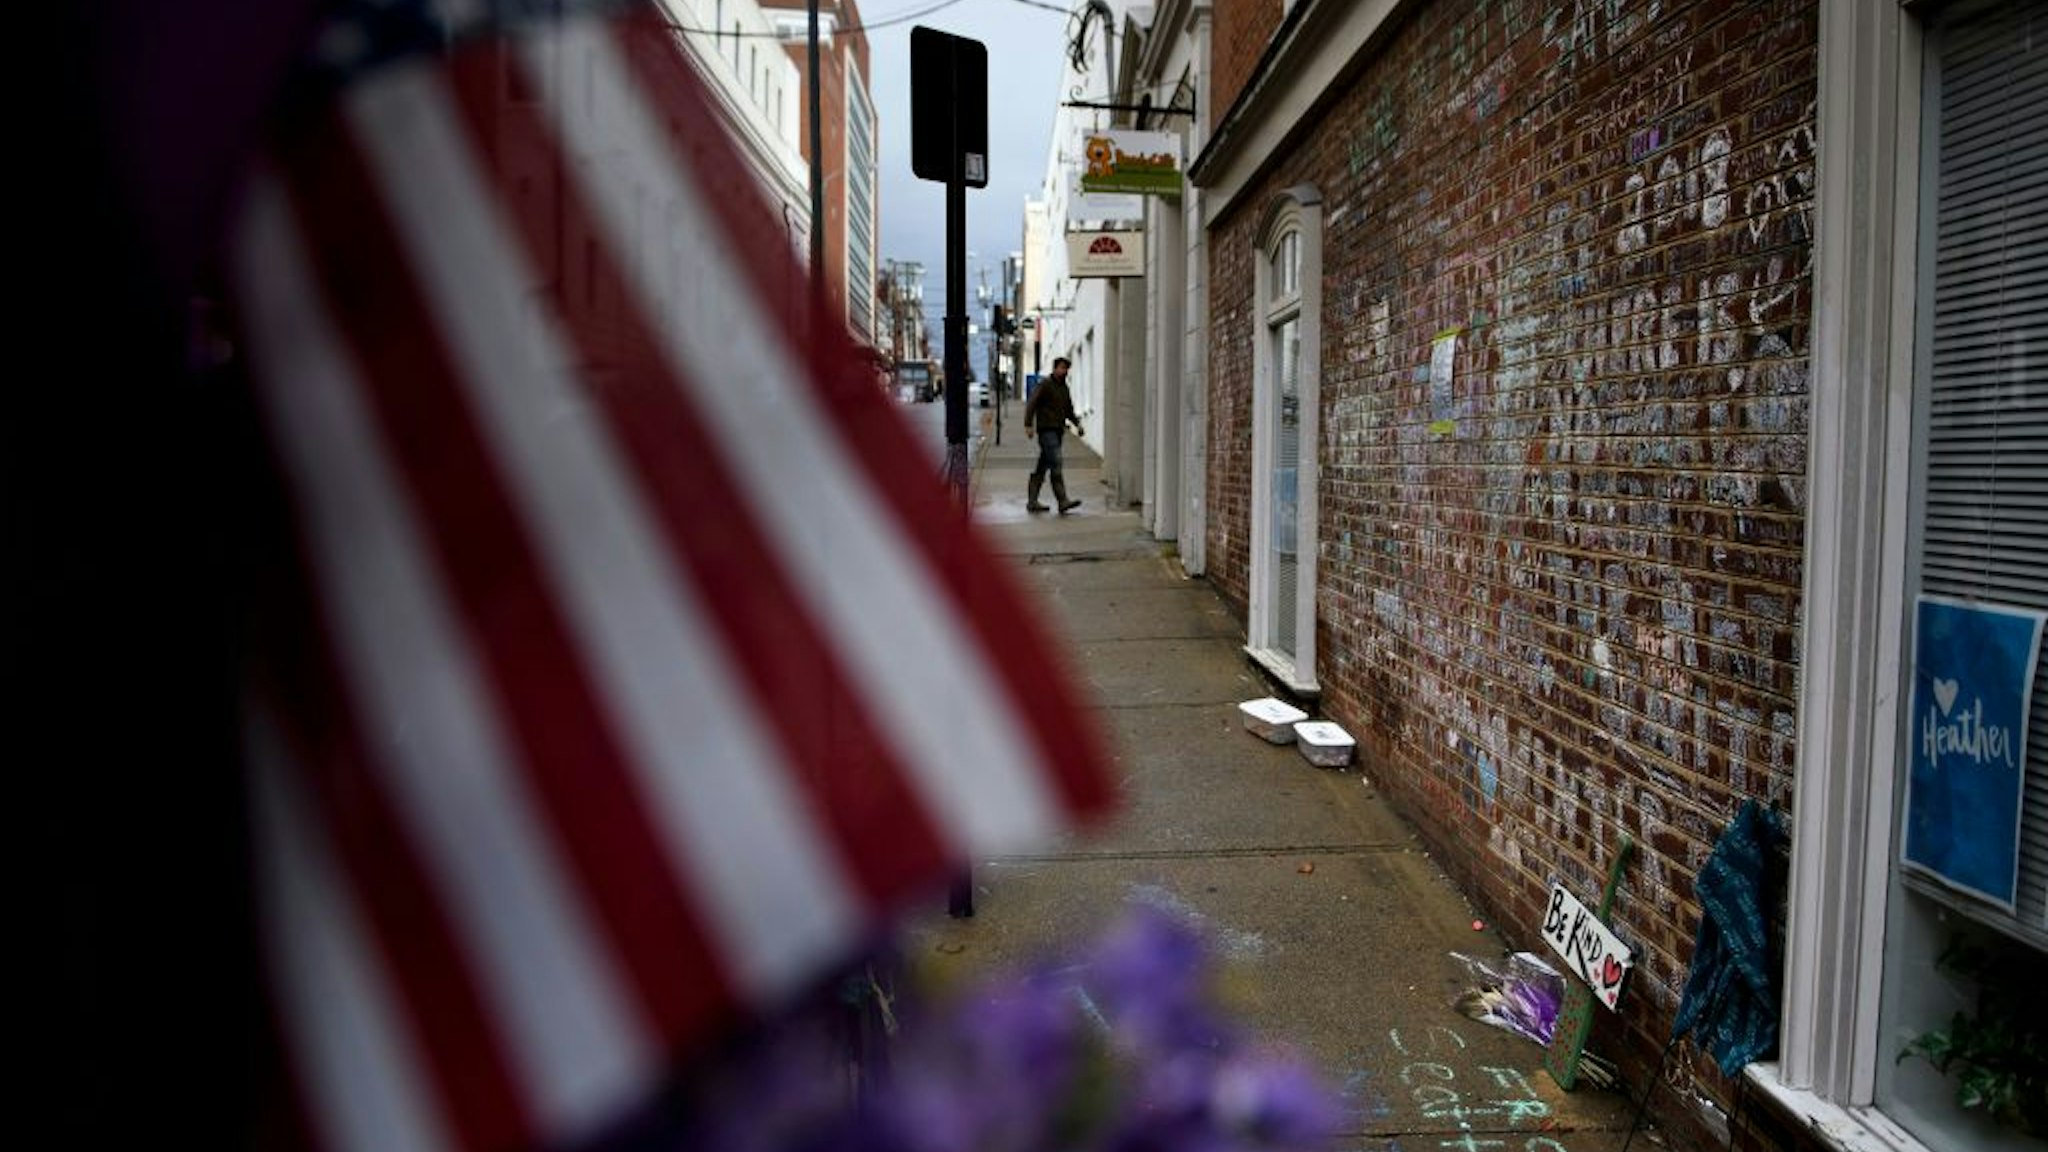 A memorial to Heather Heyer and the other victims of last year's hit and run is seen a few blocks away the first day of jury selection for James Fields's murder trial at the Charlottesville Circuit Court, November 26, 2018 in Charlottesville, Virginia. - An American neo-Nazi denied murder at the start of his trial for allegedly ramming his car into counter-protesters at a 2017 white supremacist rally that made the city of Charlottesville a byword for rising racial tensions under President Donald Trump.